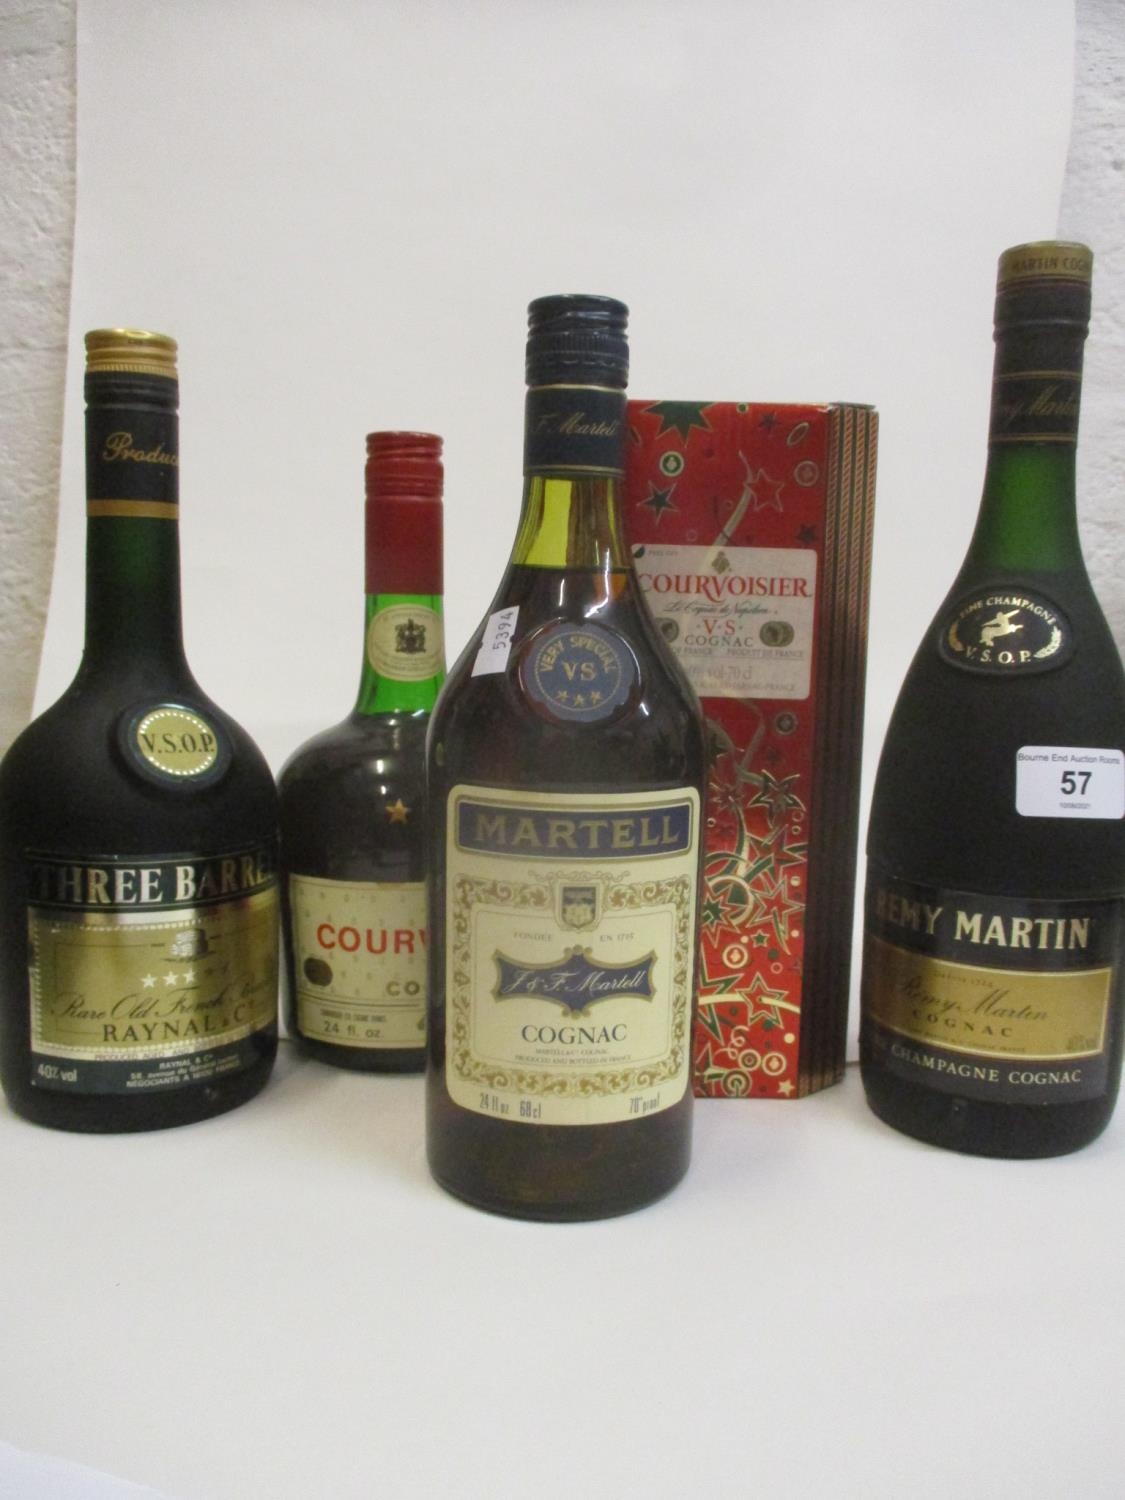 Four bottles of Cognac to include Courvoisier, Martel, Remy Martin and one bottle of Three Barrels